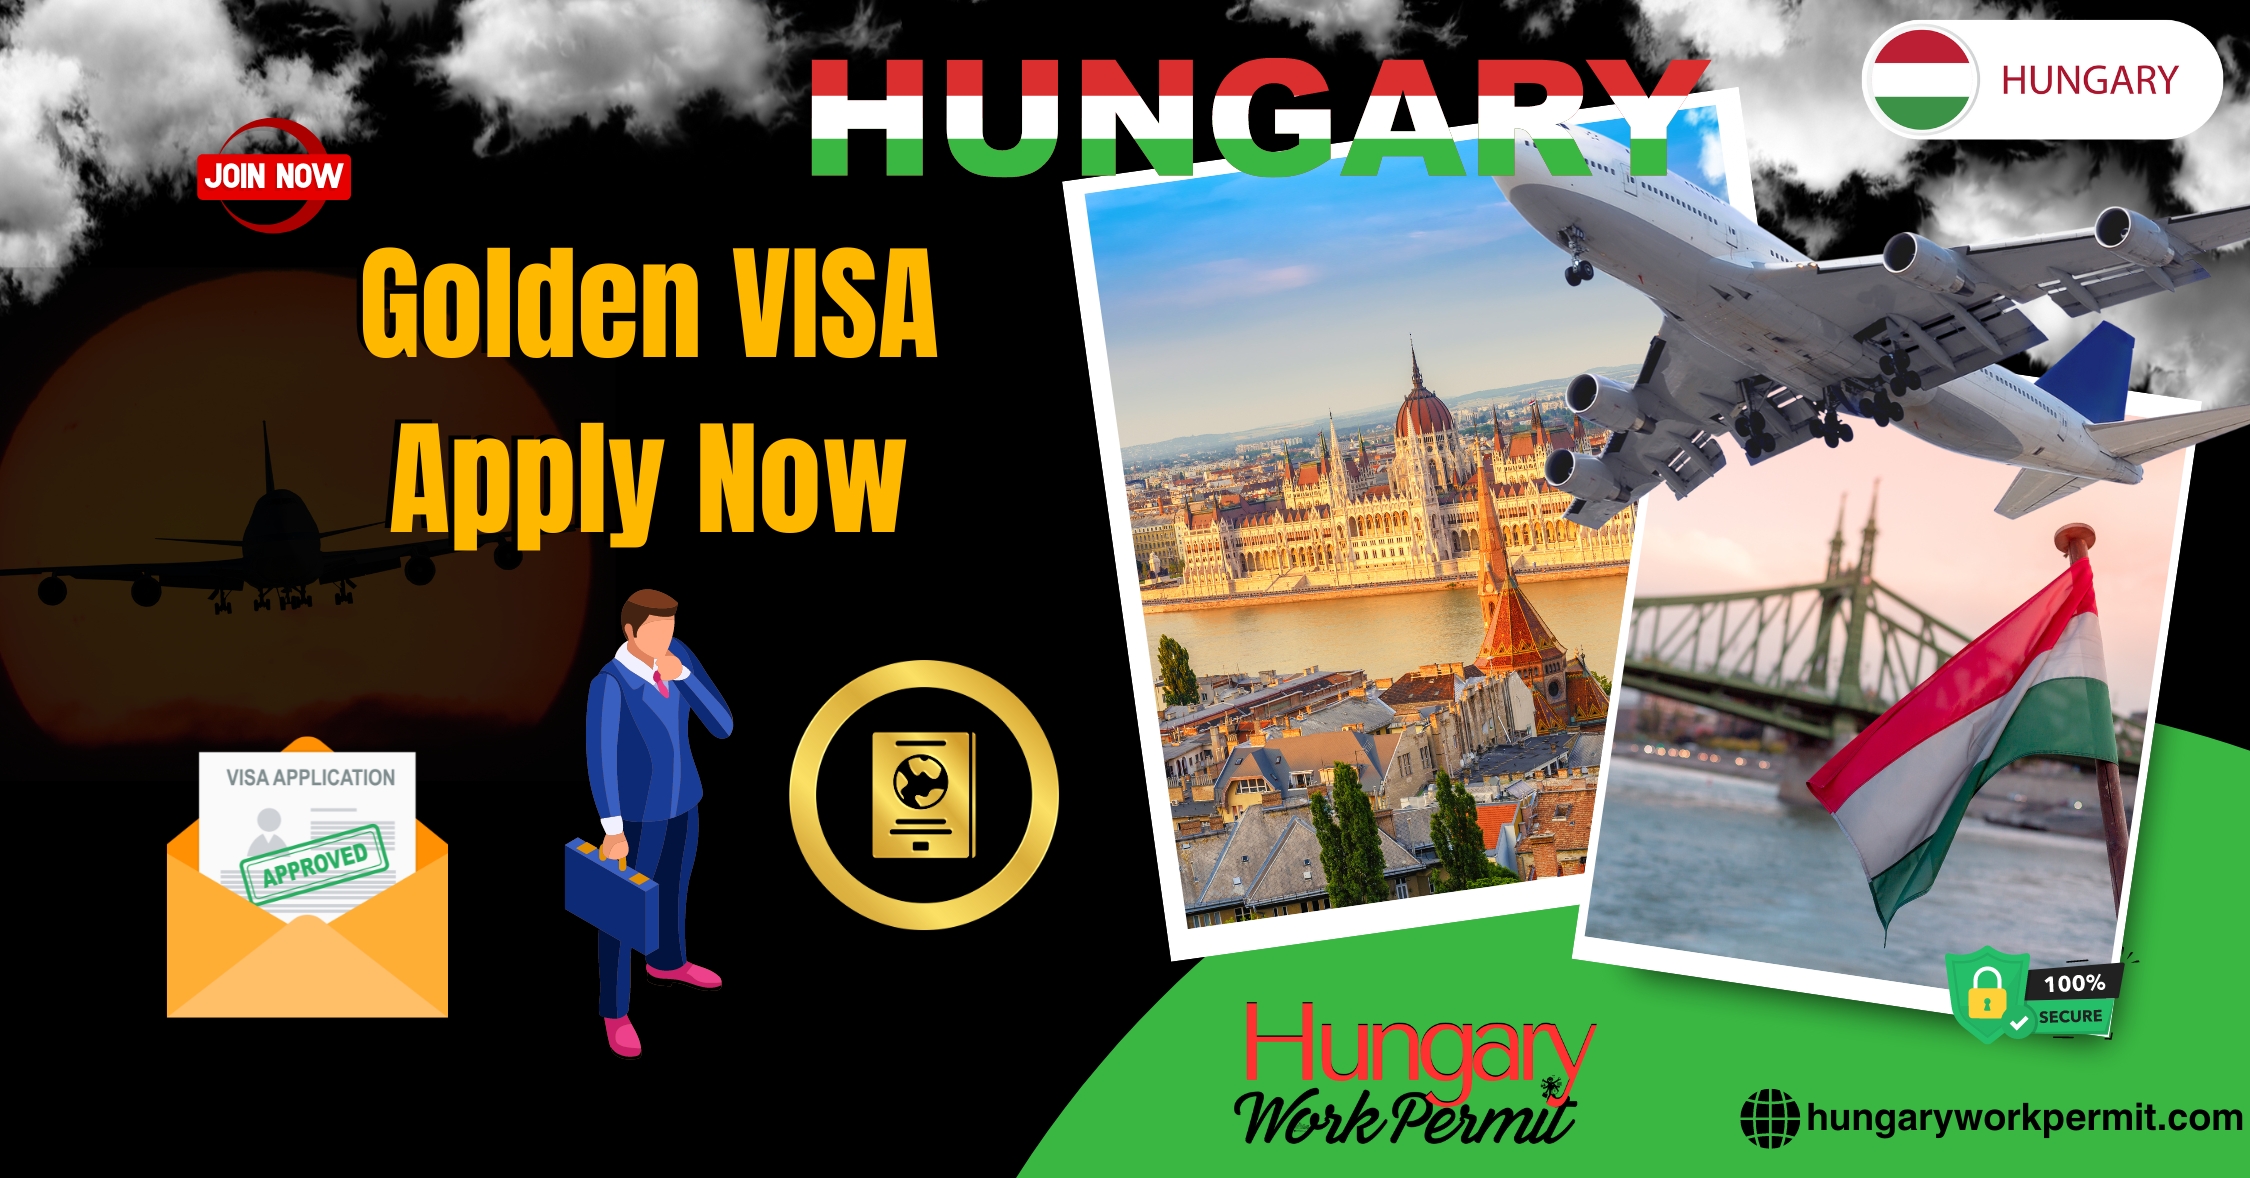 How to Apply for a Hungary Golden Visa?